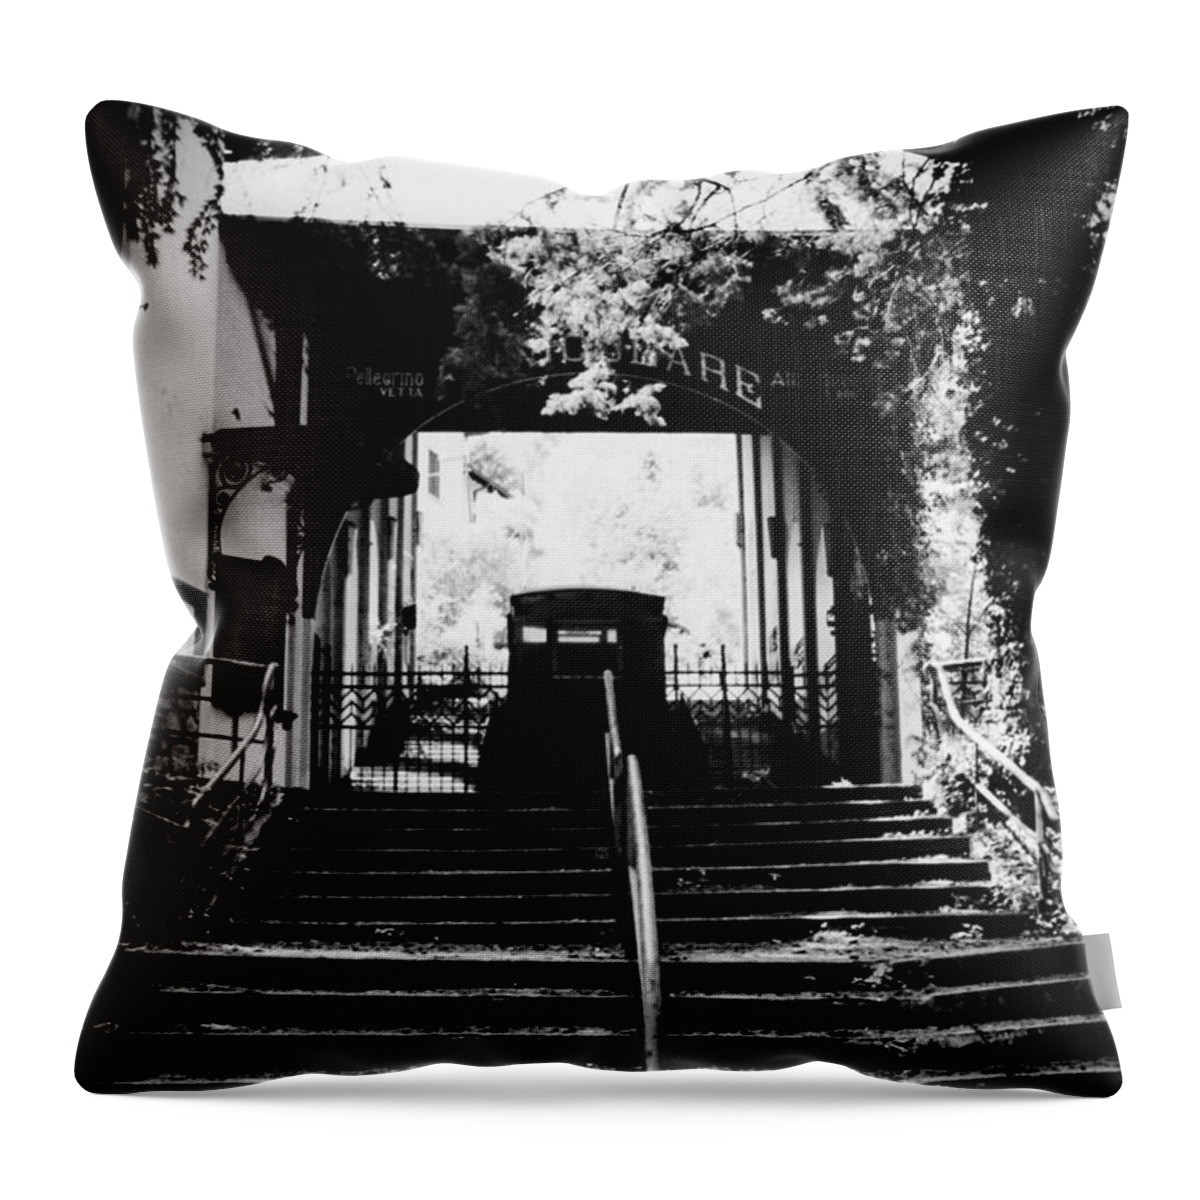 Cable Car Throw Pillow featuring the photograph Cable Car by Lara Spinazzola